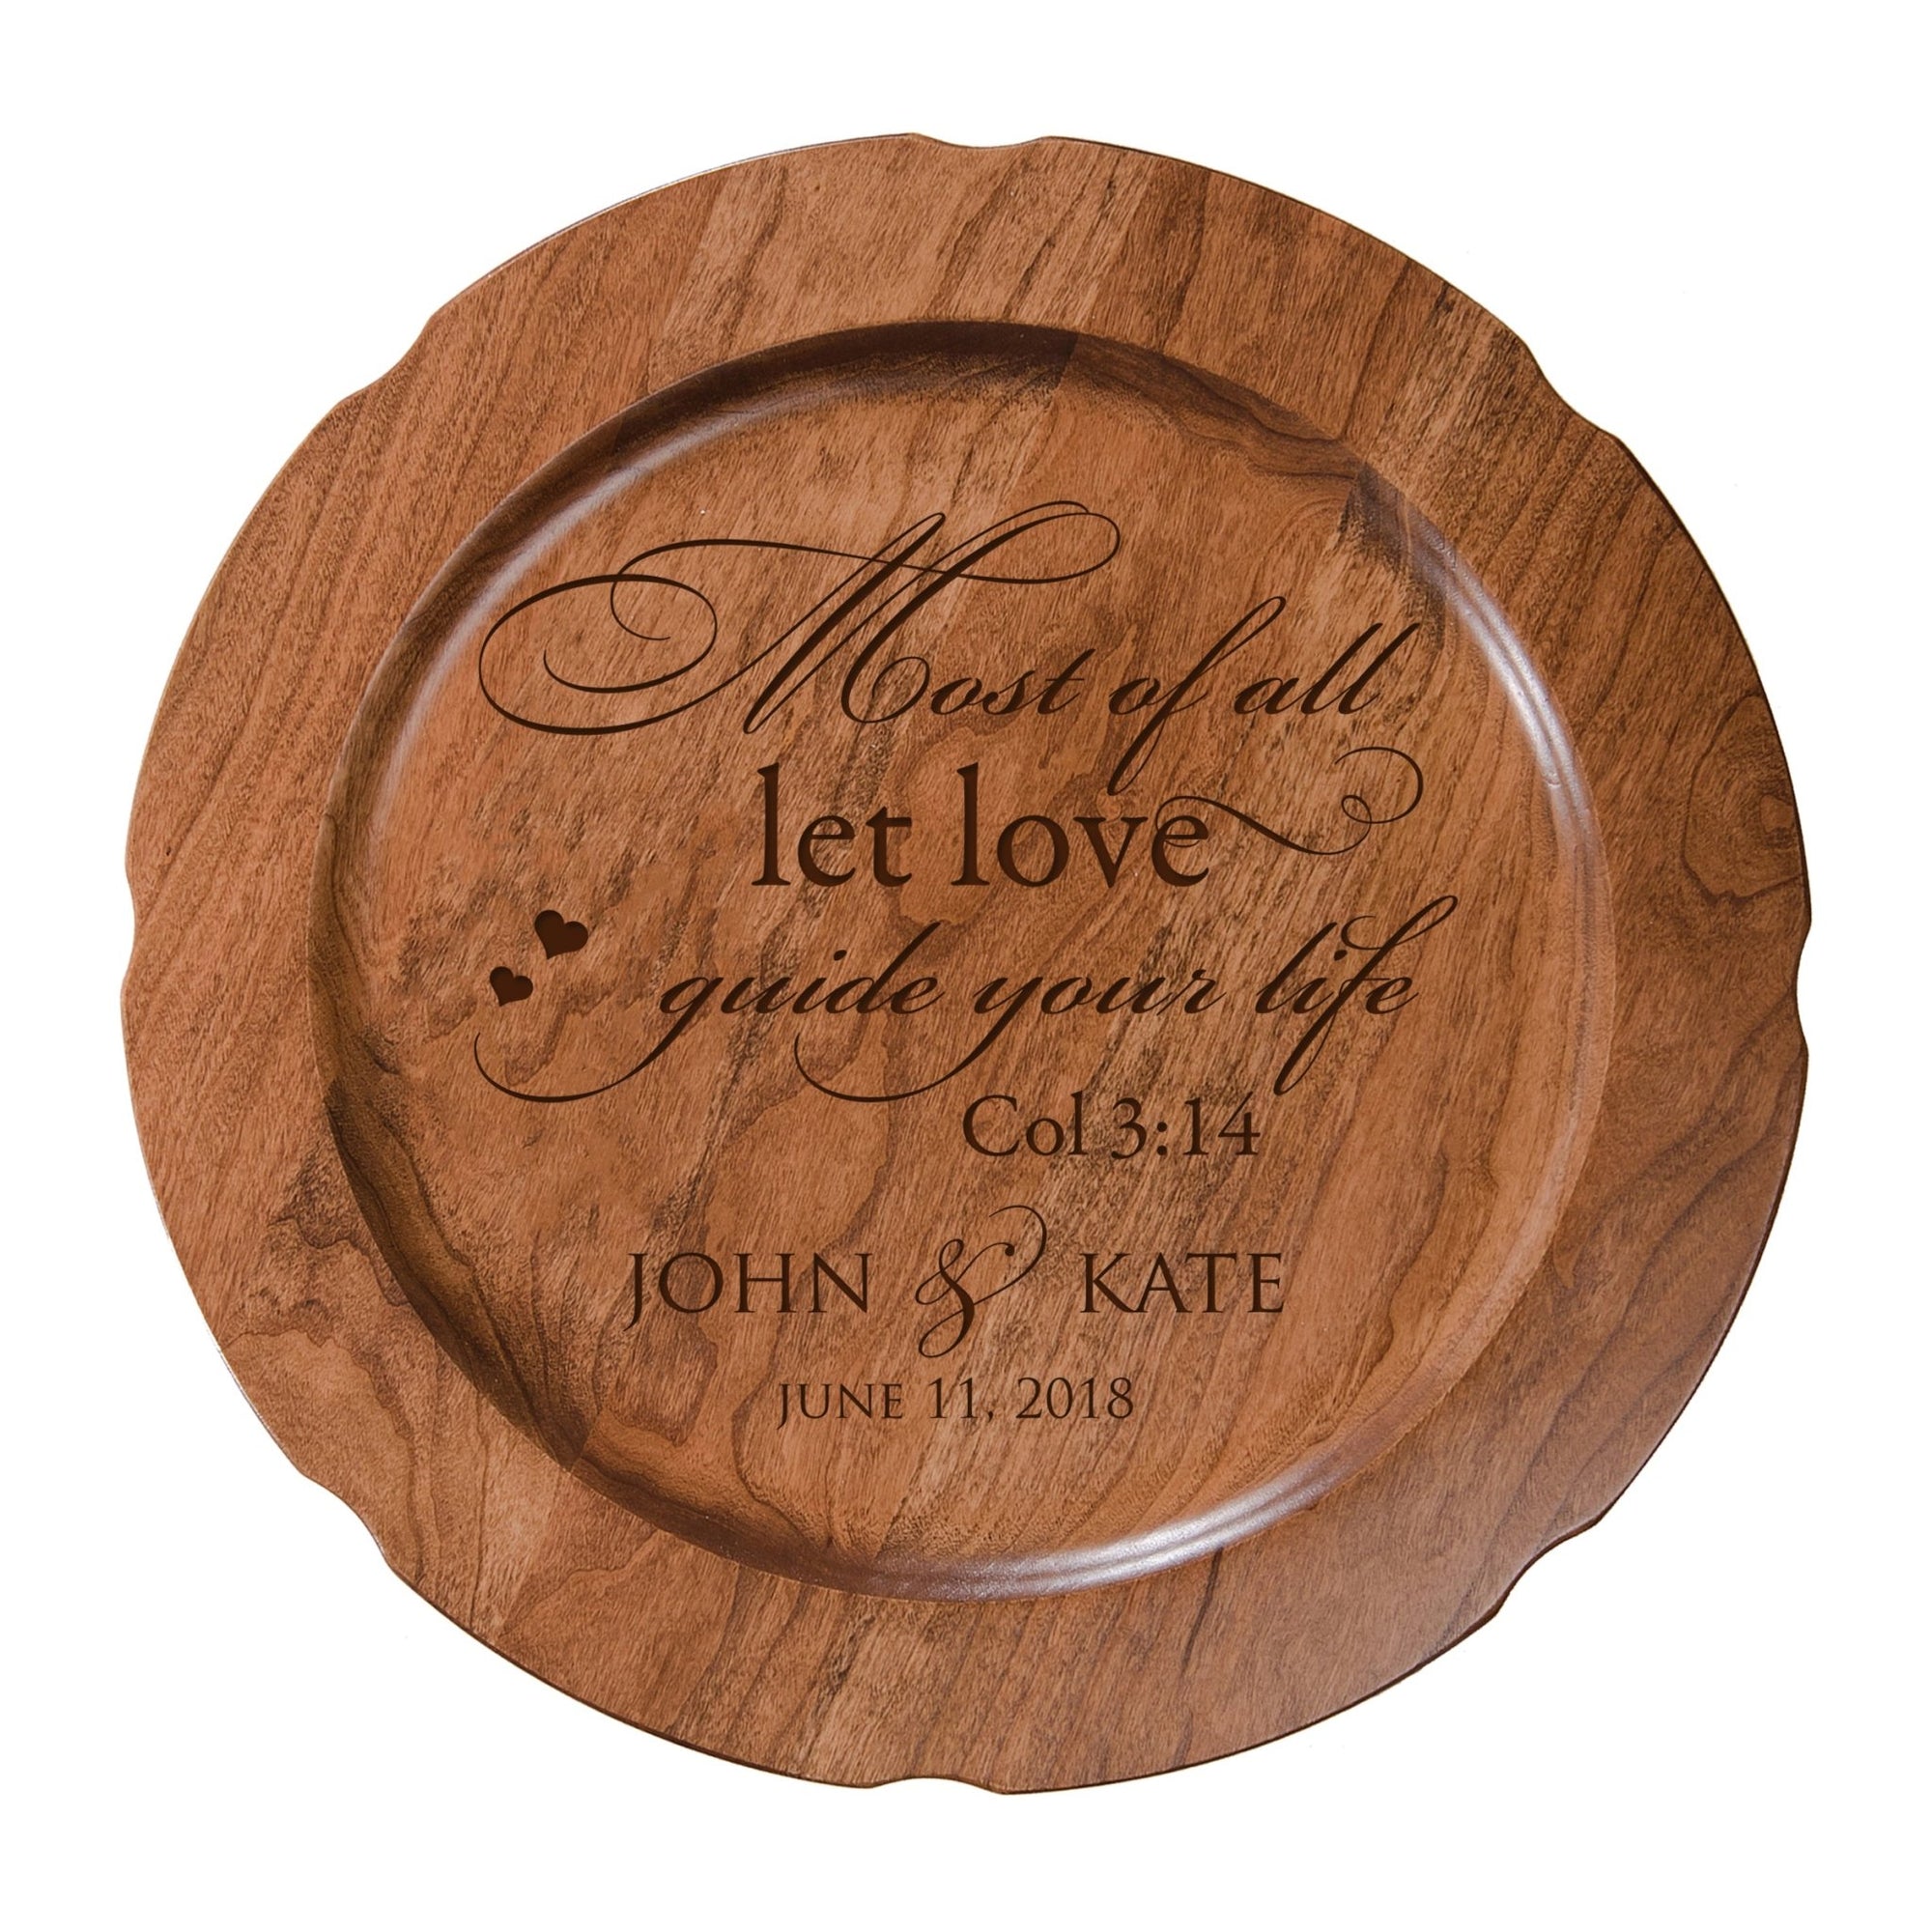 Personalized Inspirational Plates With Quotes - Most Of All - LifeSong Milestones